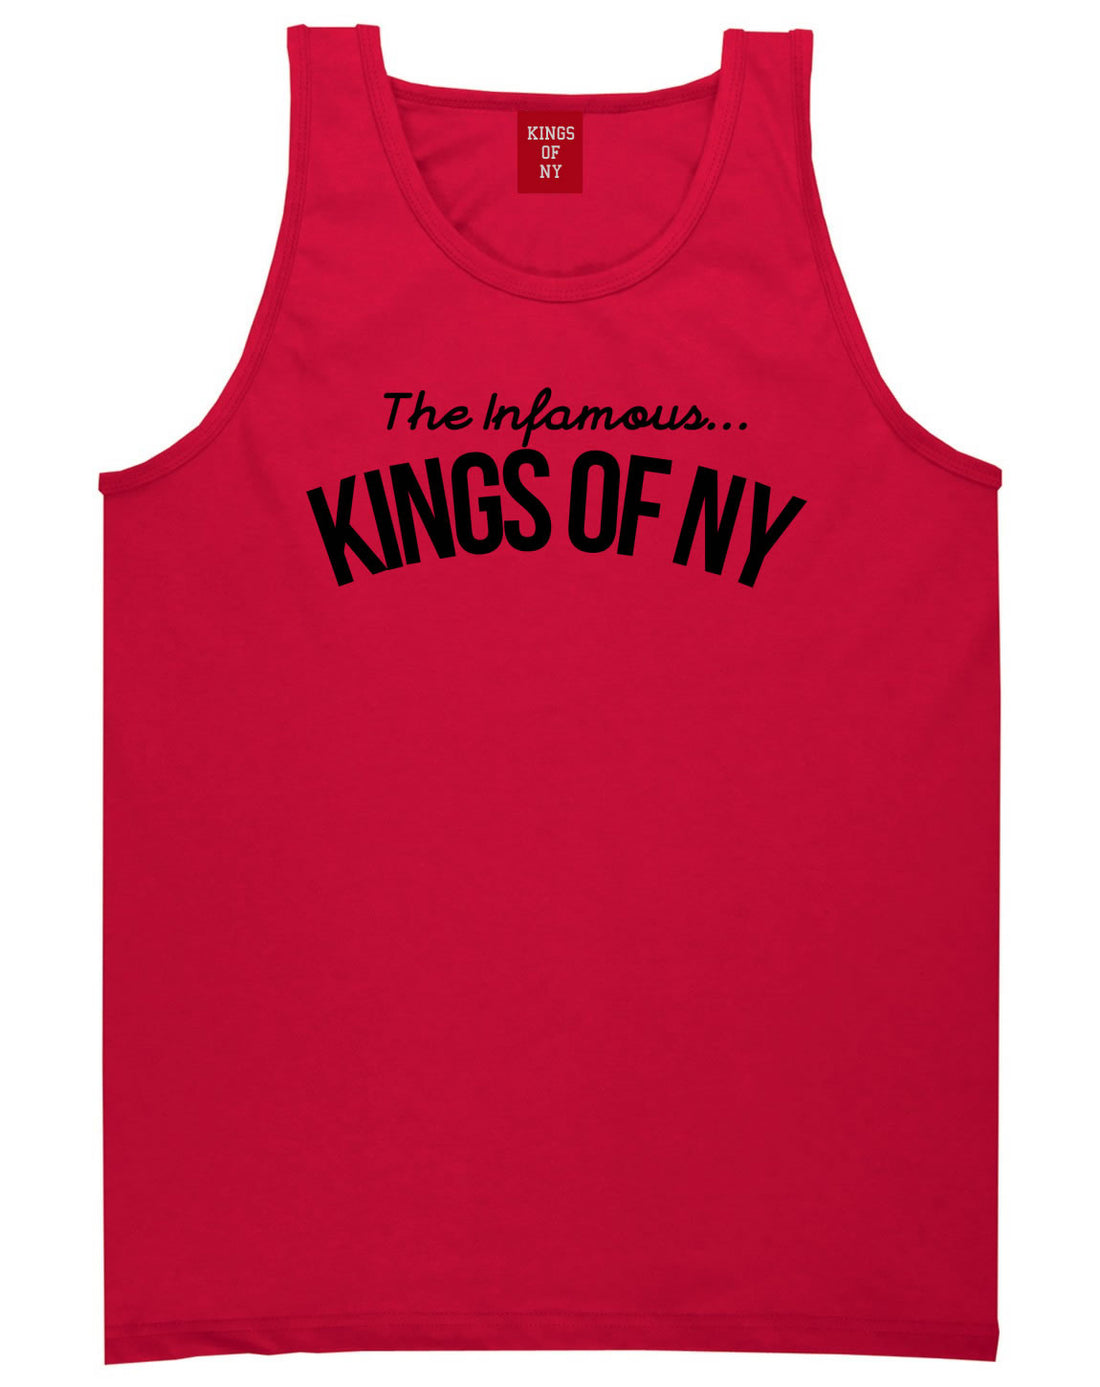 The Infamous Kings Of NY Tank Top in Red By Kings Of NY